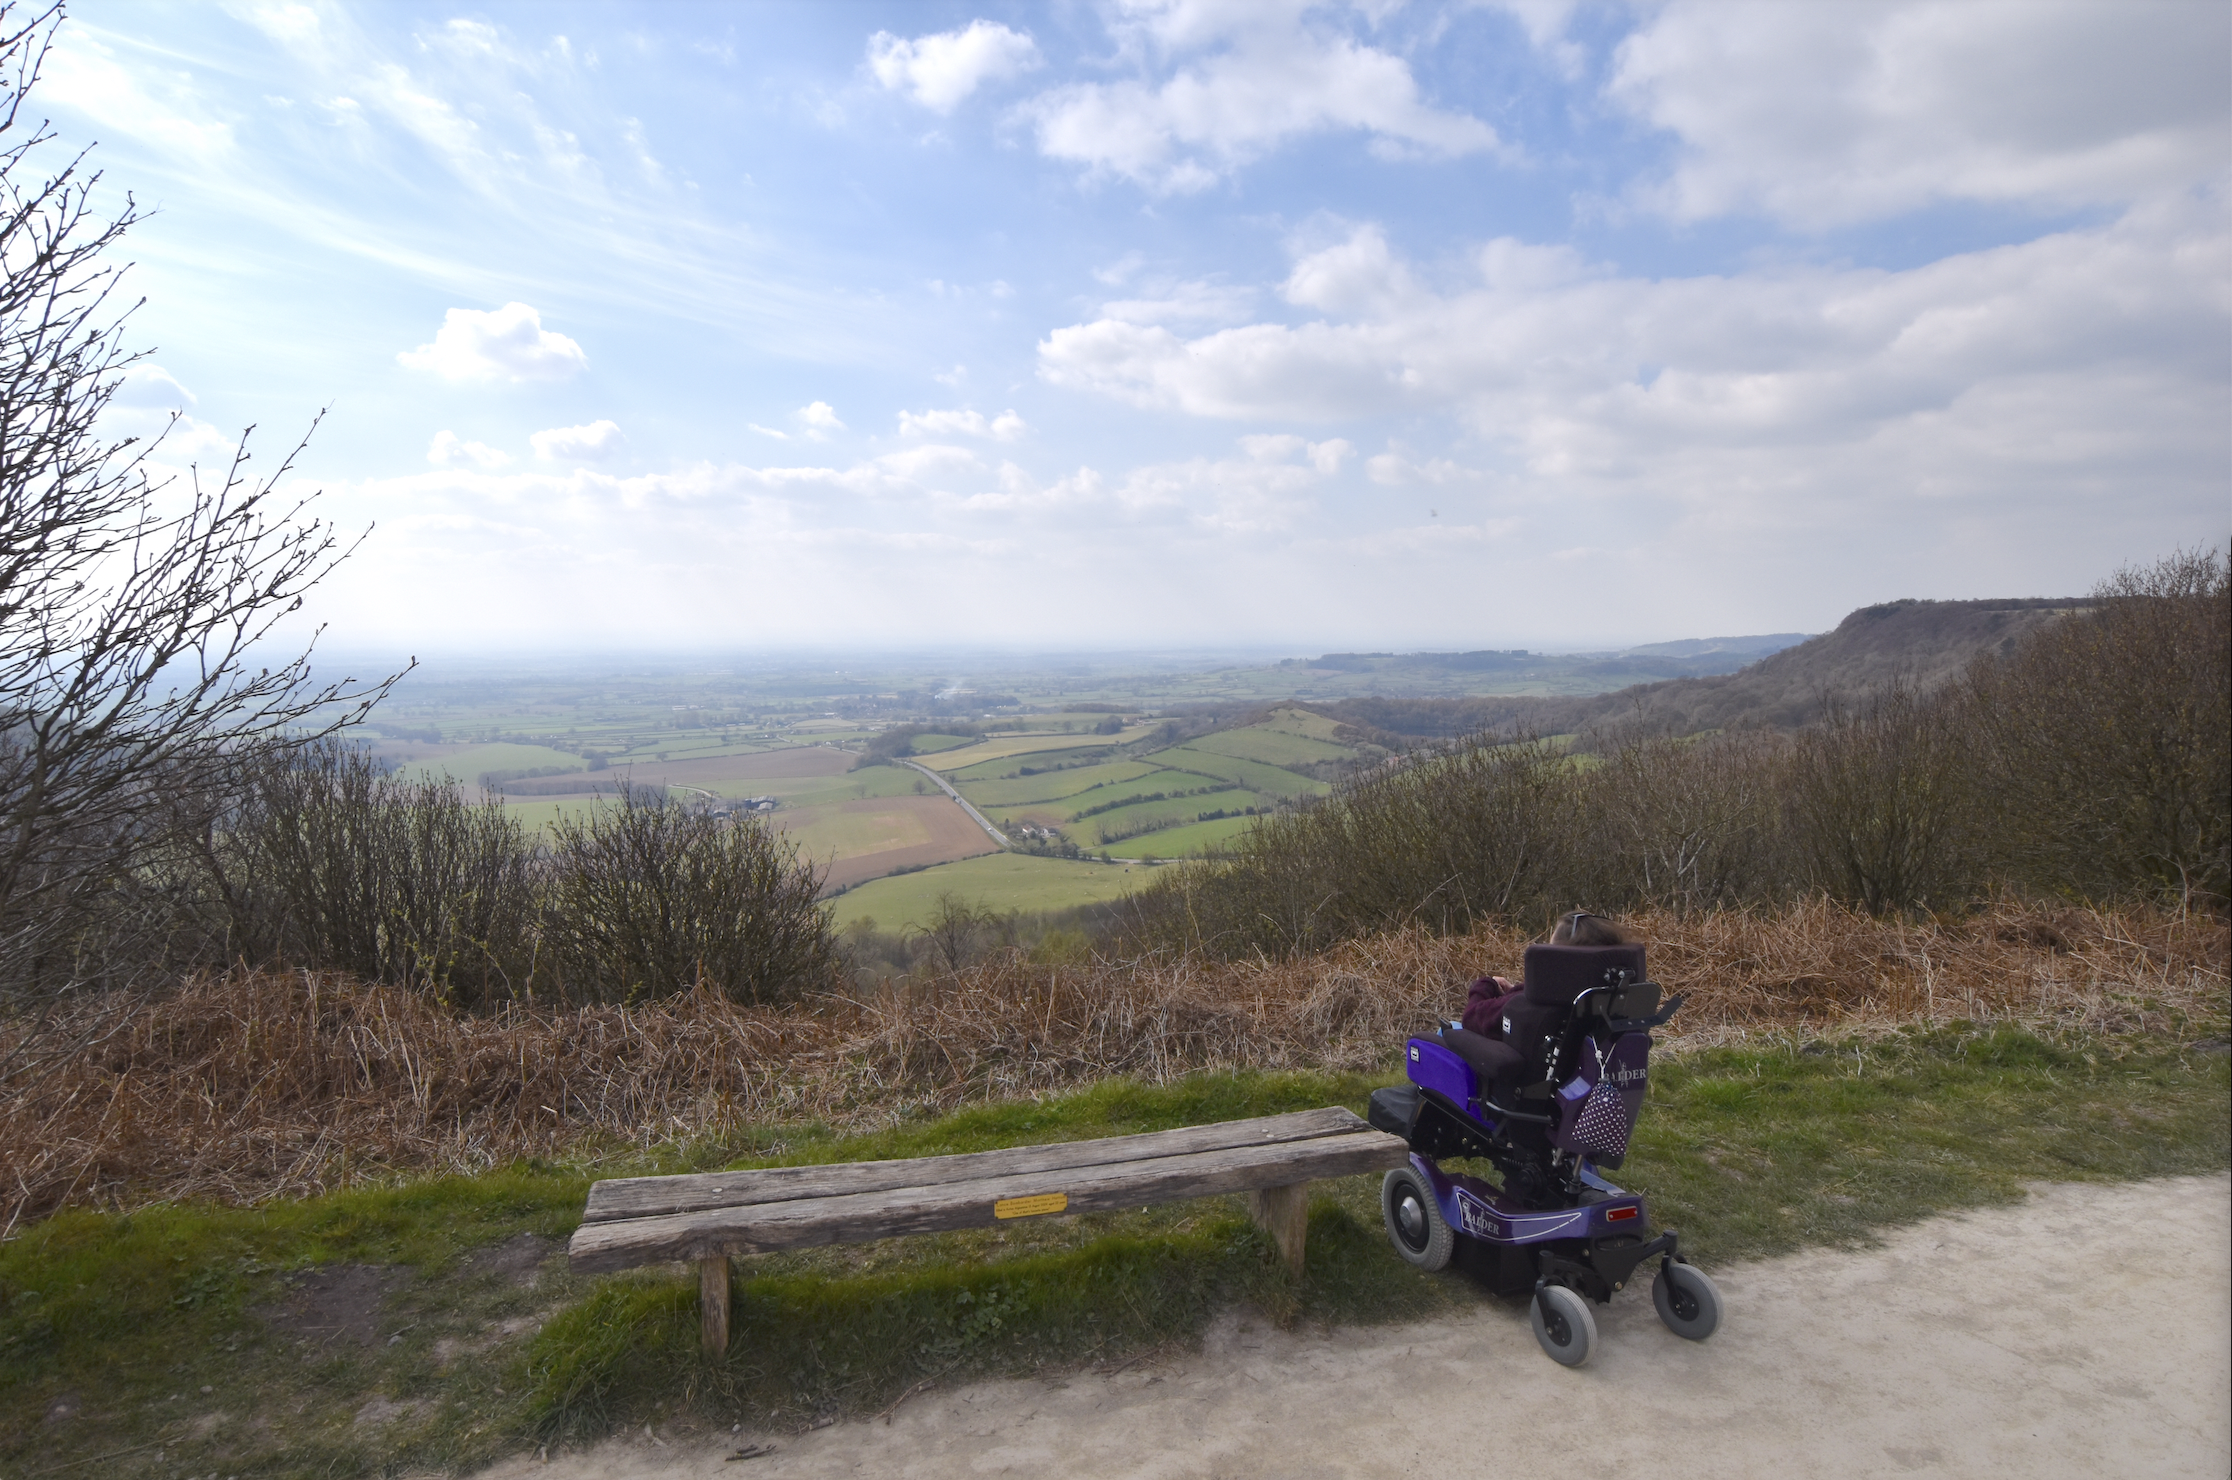  Sutton Bank - The Finest View in England 